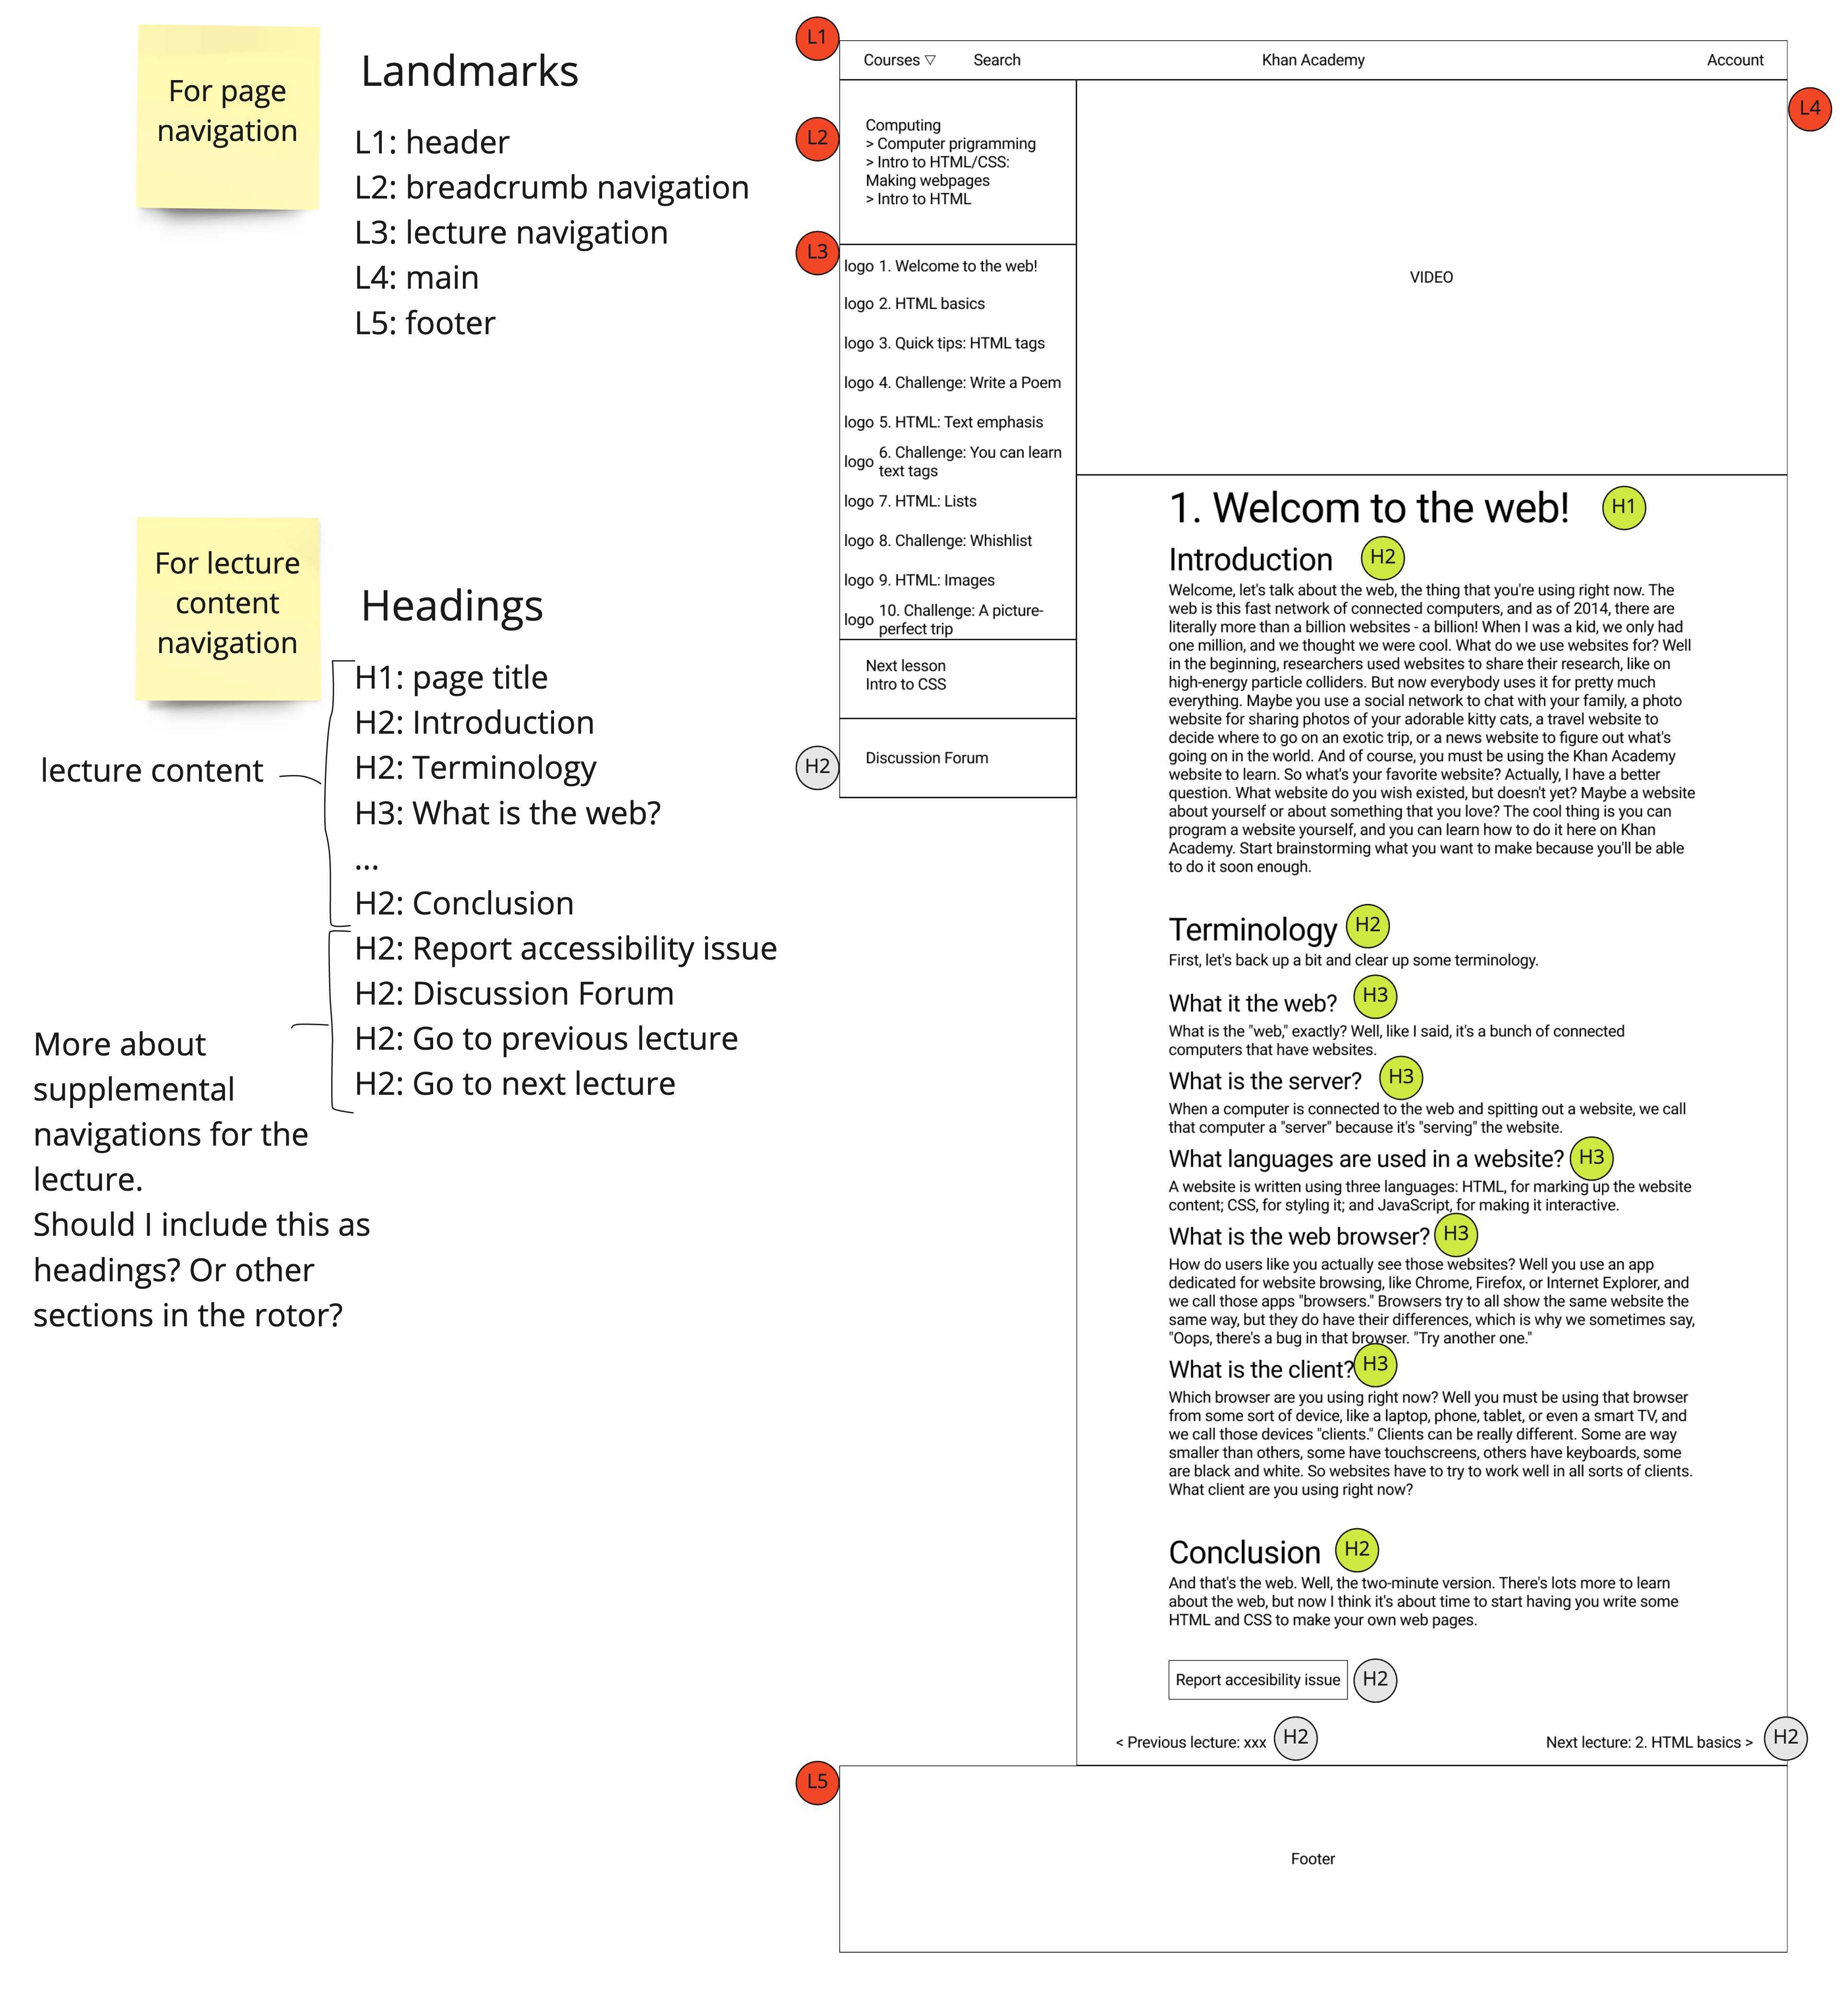 On the right is a wireframe of Welcome to the Web page. There are two types of annotations added. The first is annotation for page navigation focusing on the structure of Landmarks. The second is for lecture content navigation focusing on the structure of Headings.